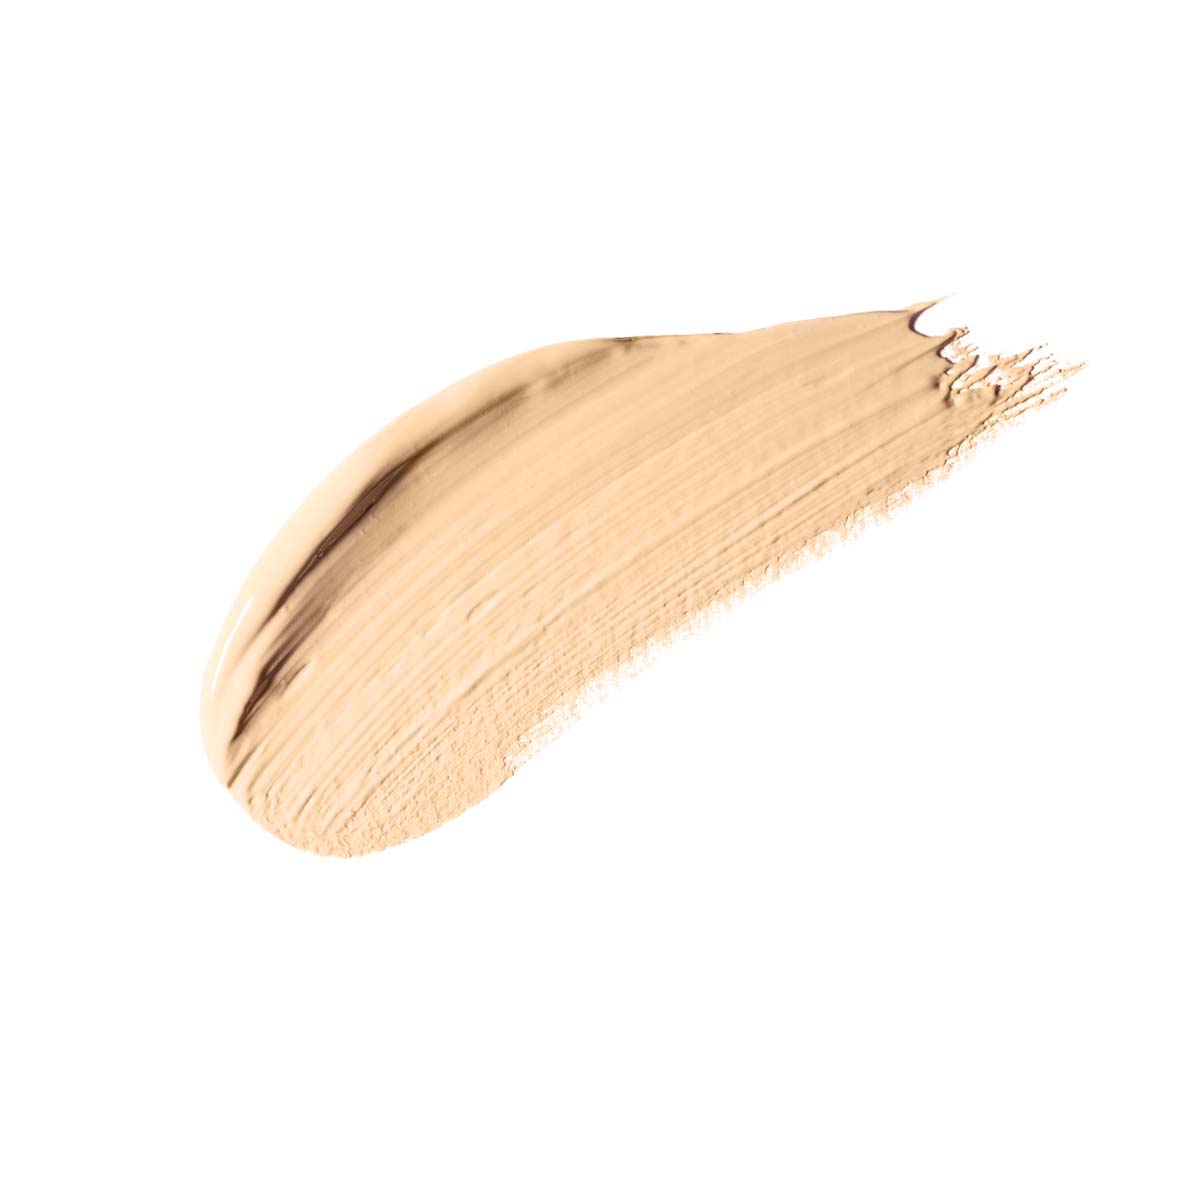 1.5 - VERY FAIR / BEIGE - medium to full coverage foundation in very fair beige undertone shade one and a half